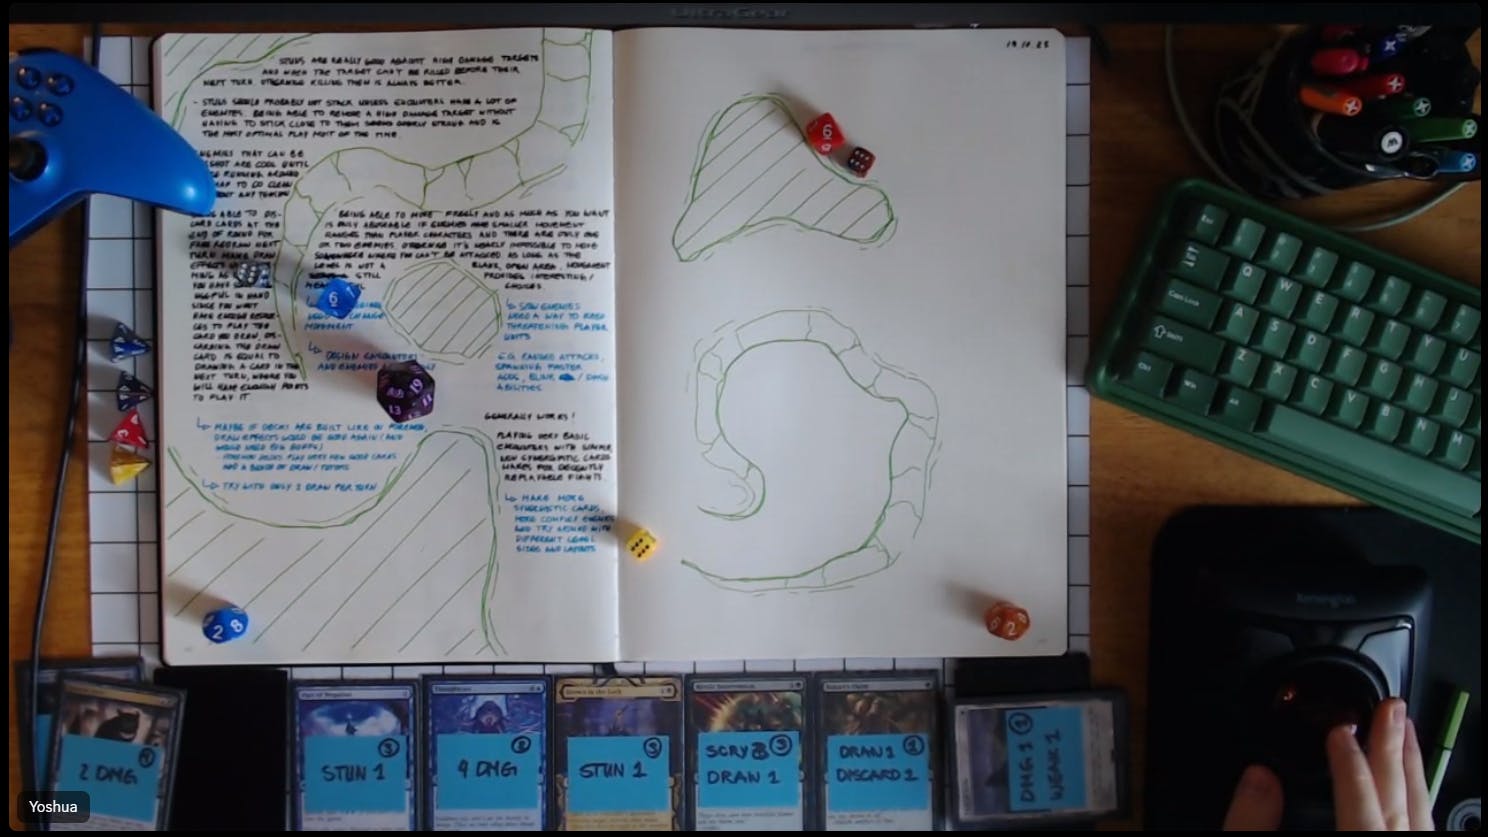 Screencap of a playtesting session showing the webcam view of a notebook mat featuring a level layout and dice